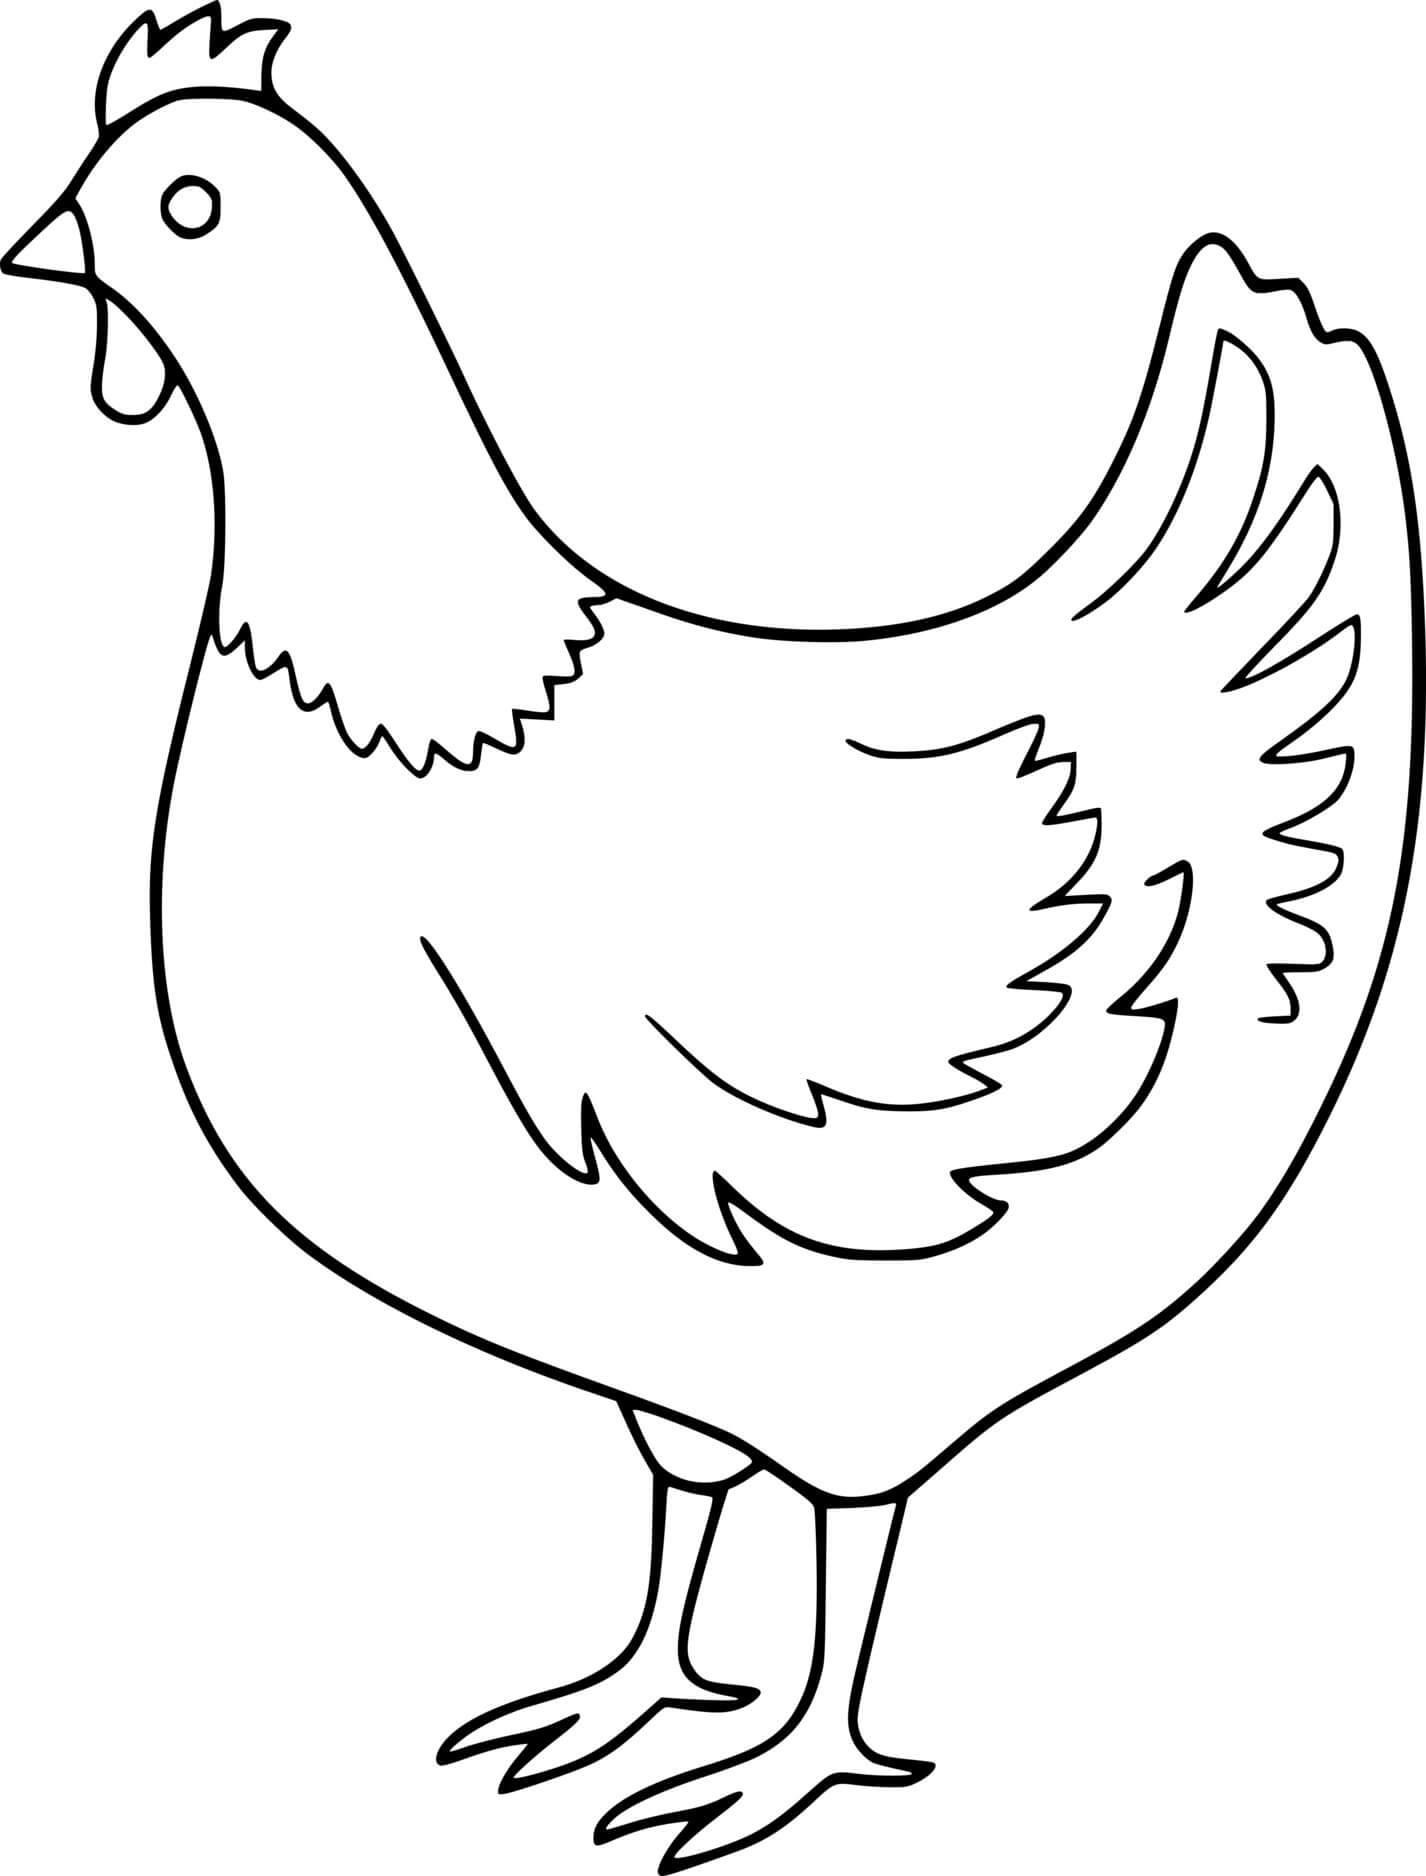 Cartoon Simple Chicken Coloring Pages - Coloring Cool